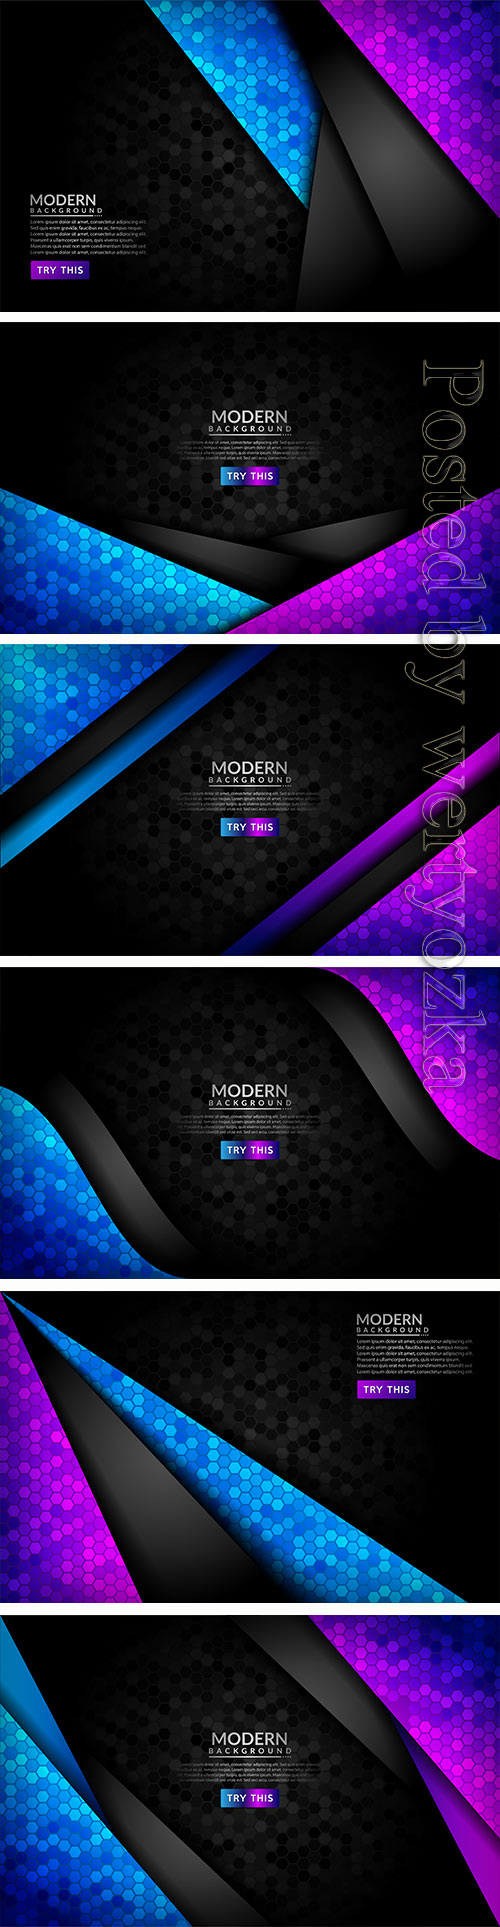 Abstract 3d dark background with purple and blue gradient